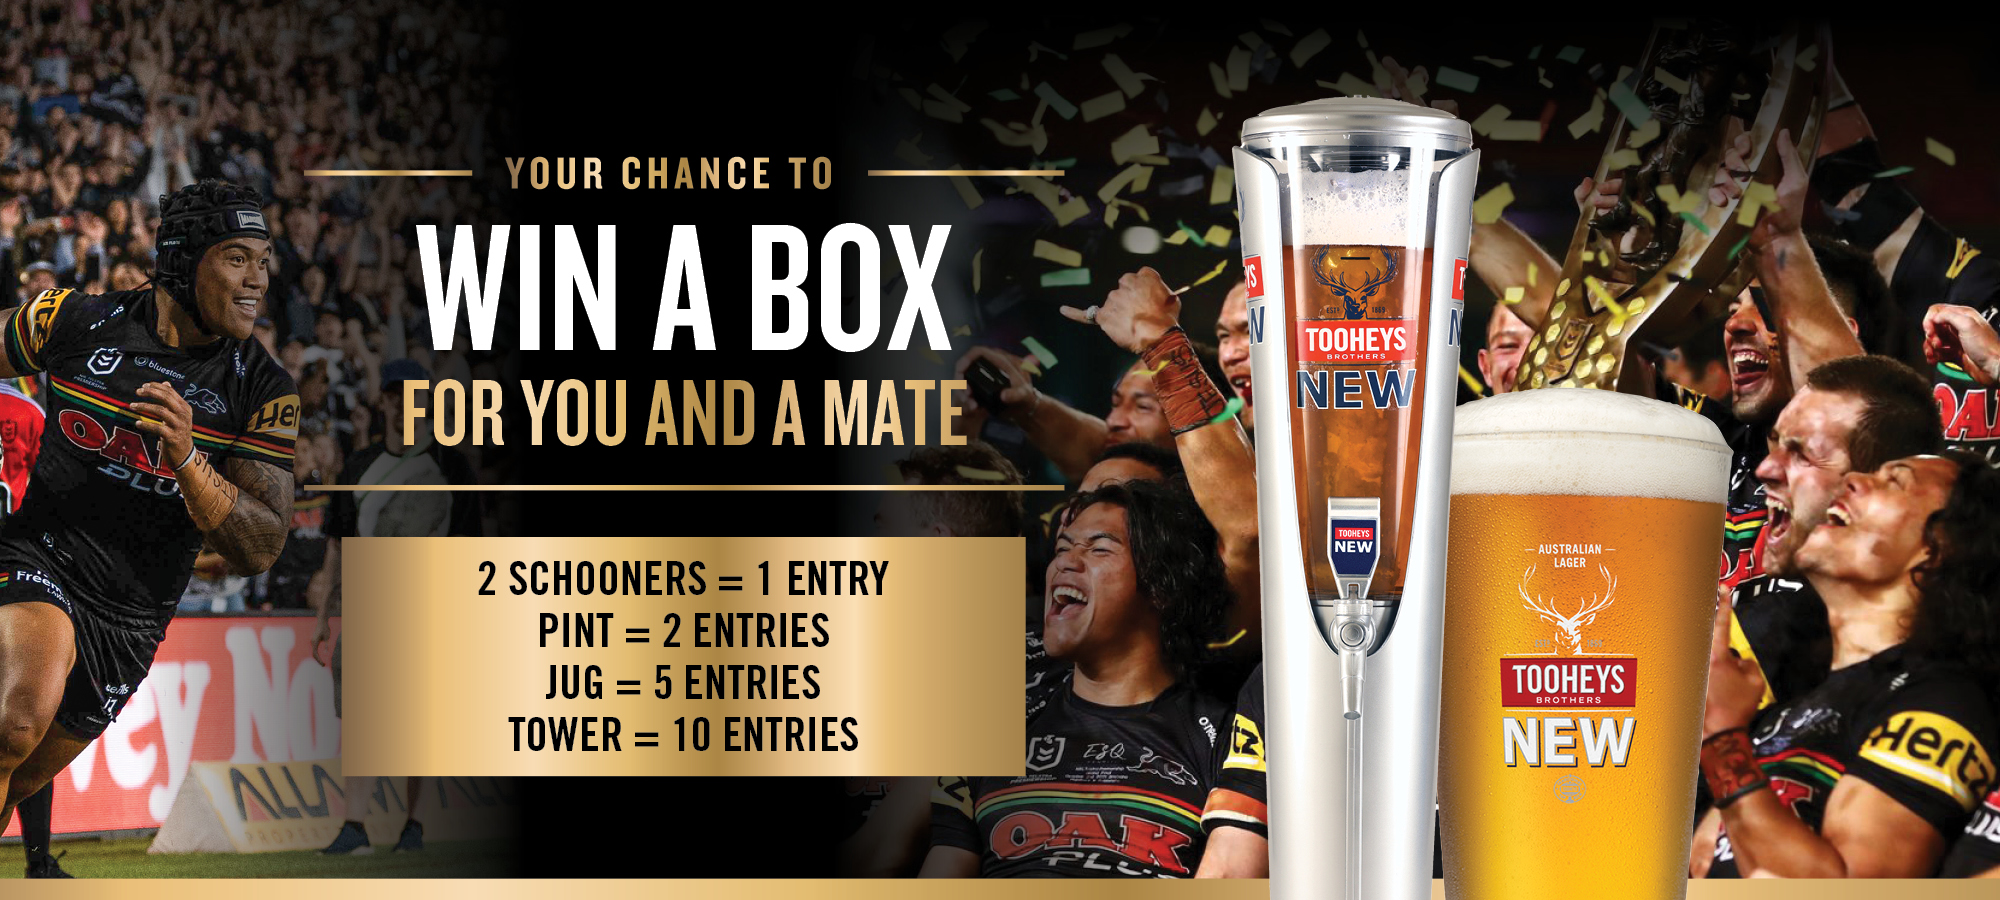 Win a Box to Panthers vs Knights